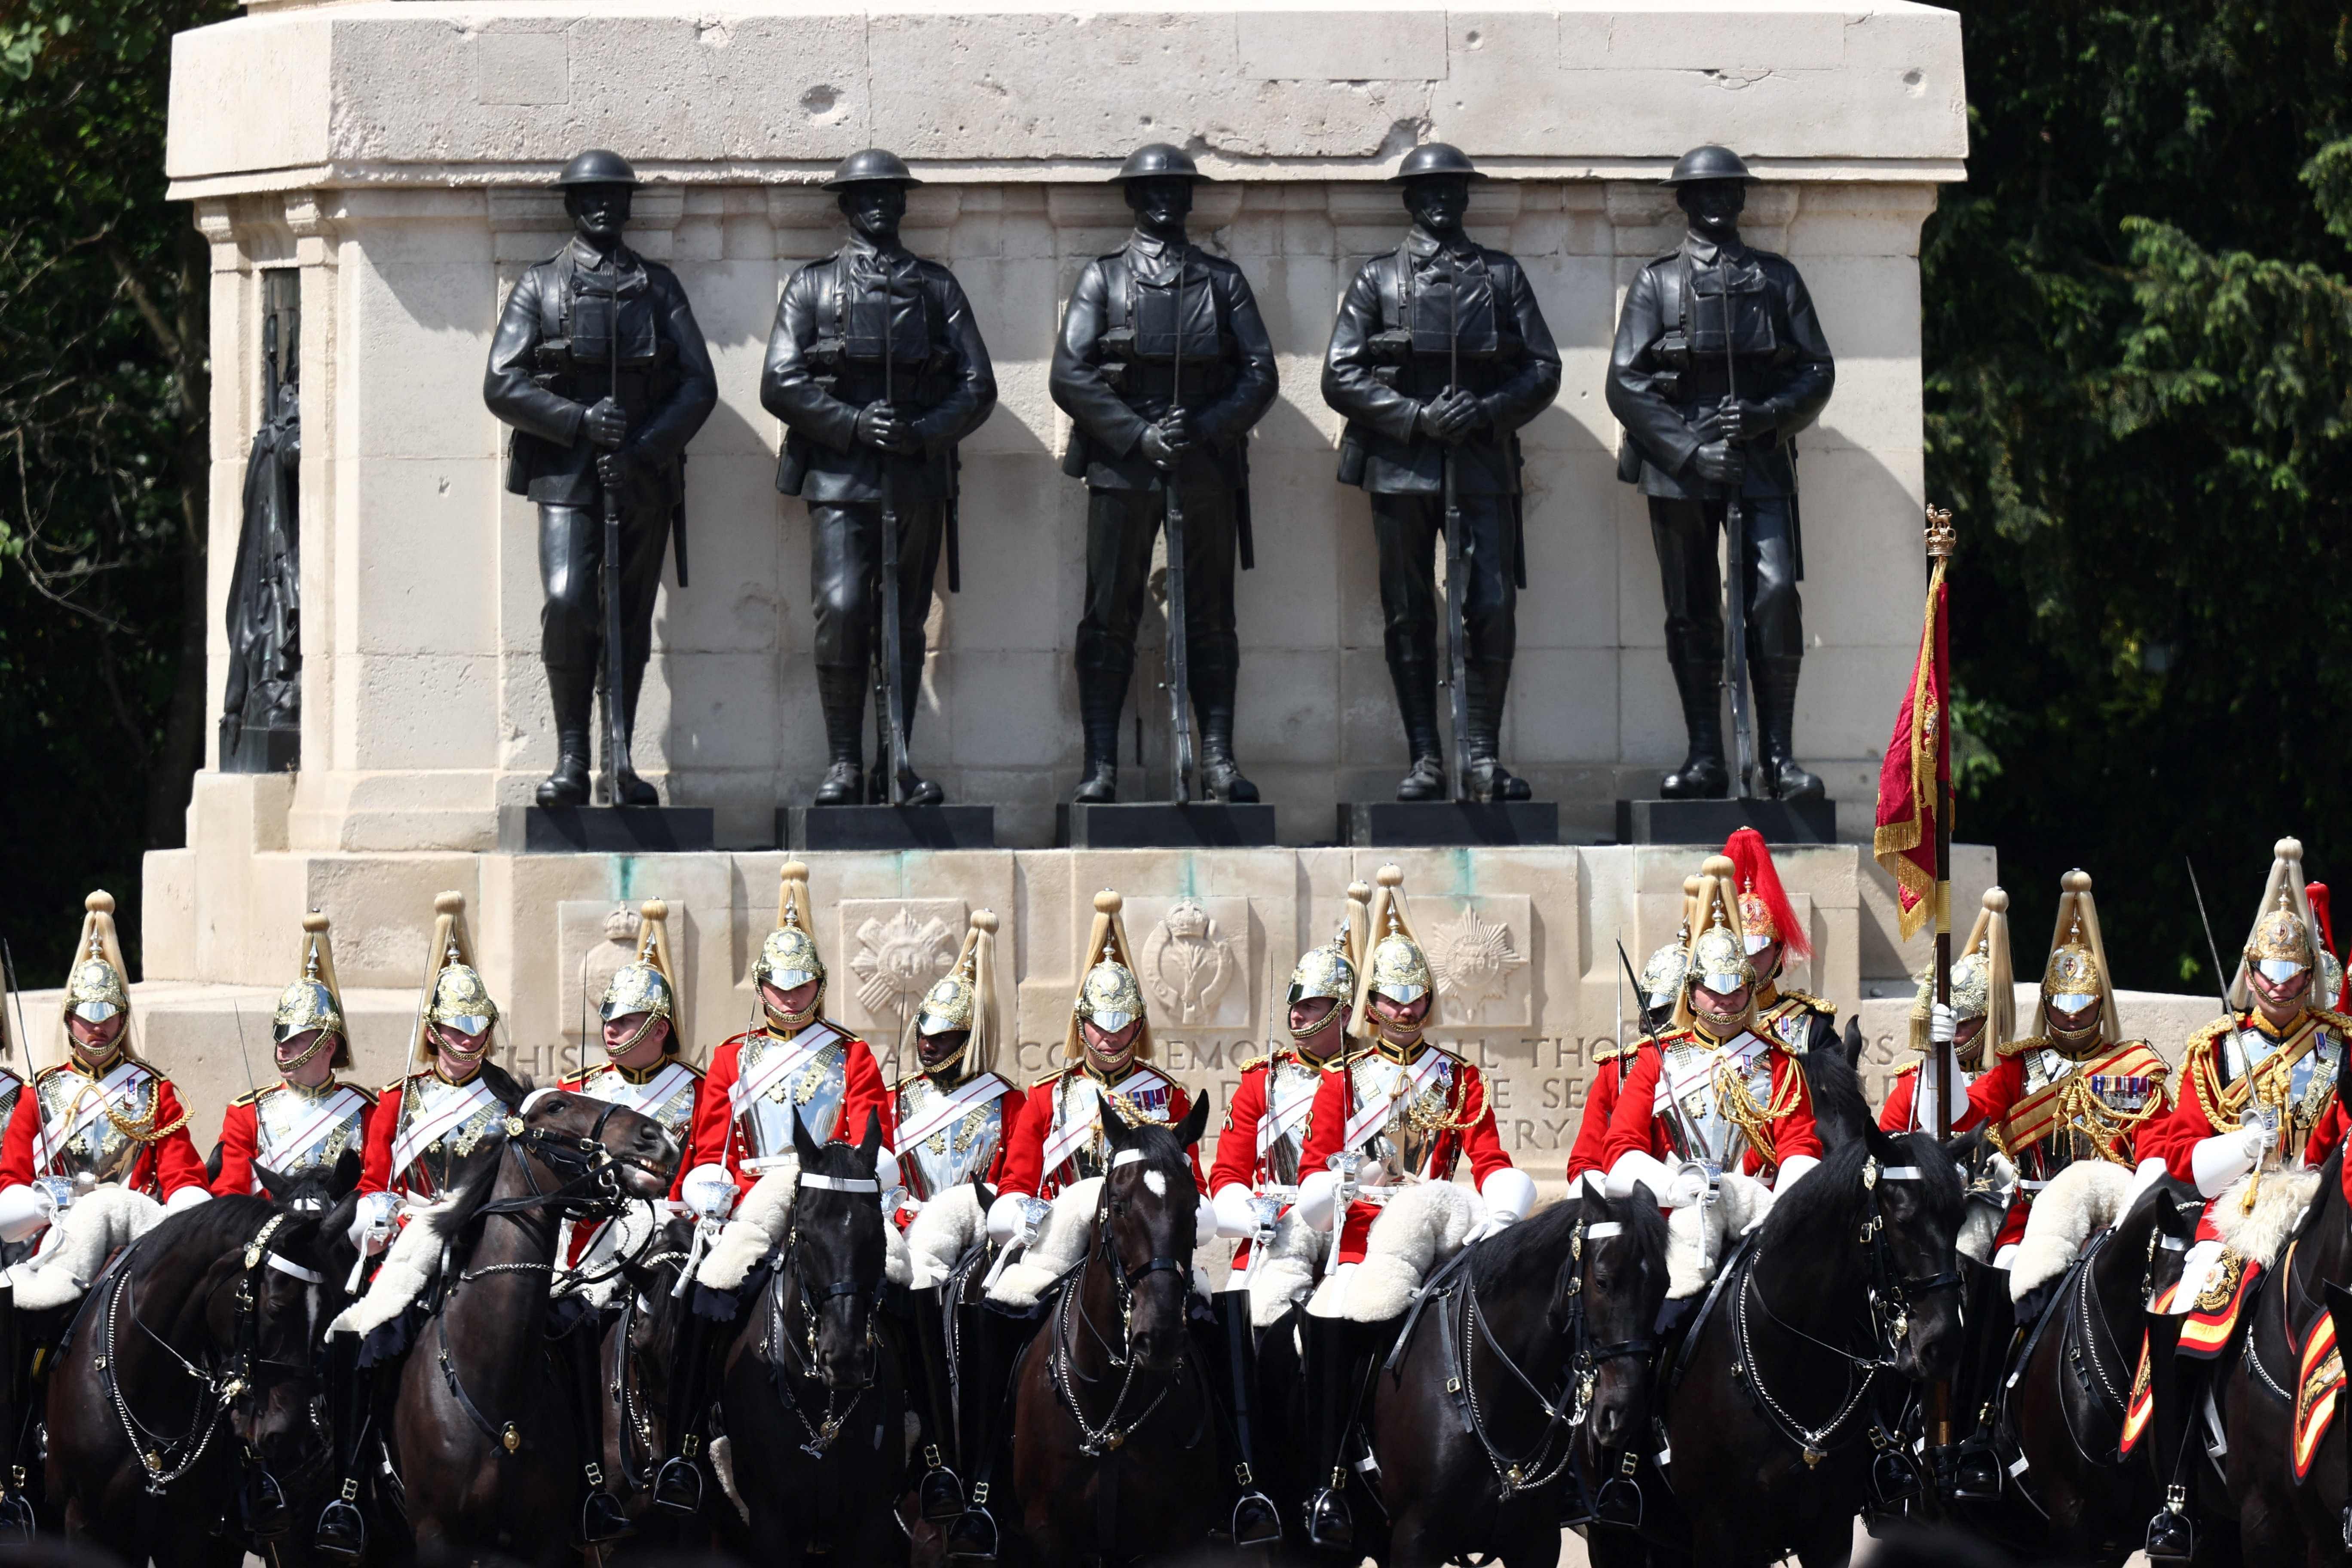 Members of the the Life Guards, , a regiment of the Household Cavalry, take part in the Queen's Birthday Parade, the Trooping the Colour, as part of Queen Elizabeth II's Platinum Jubilee celebrations. Credit: AFP Photo